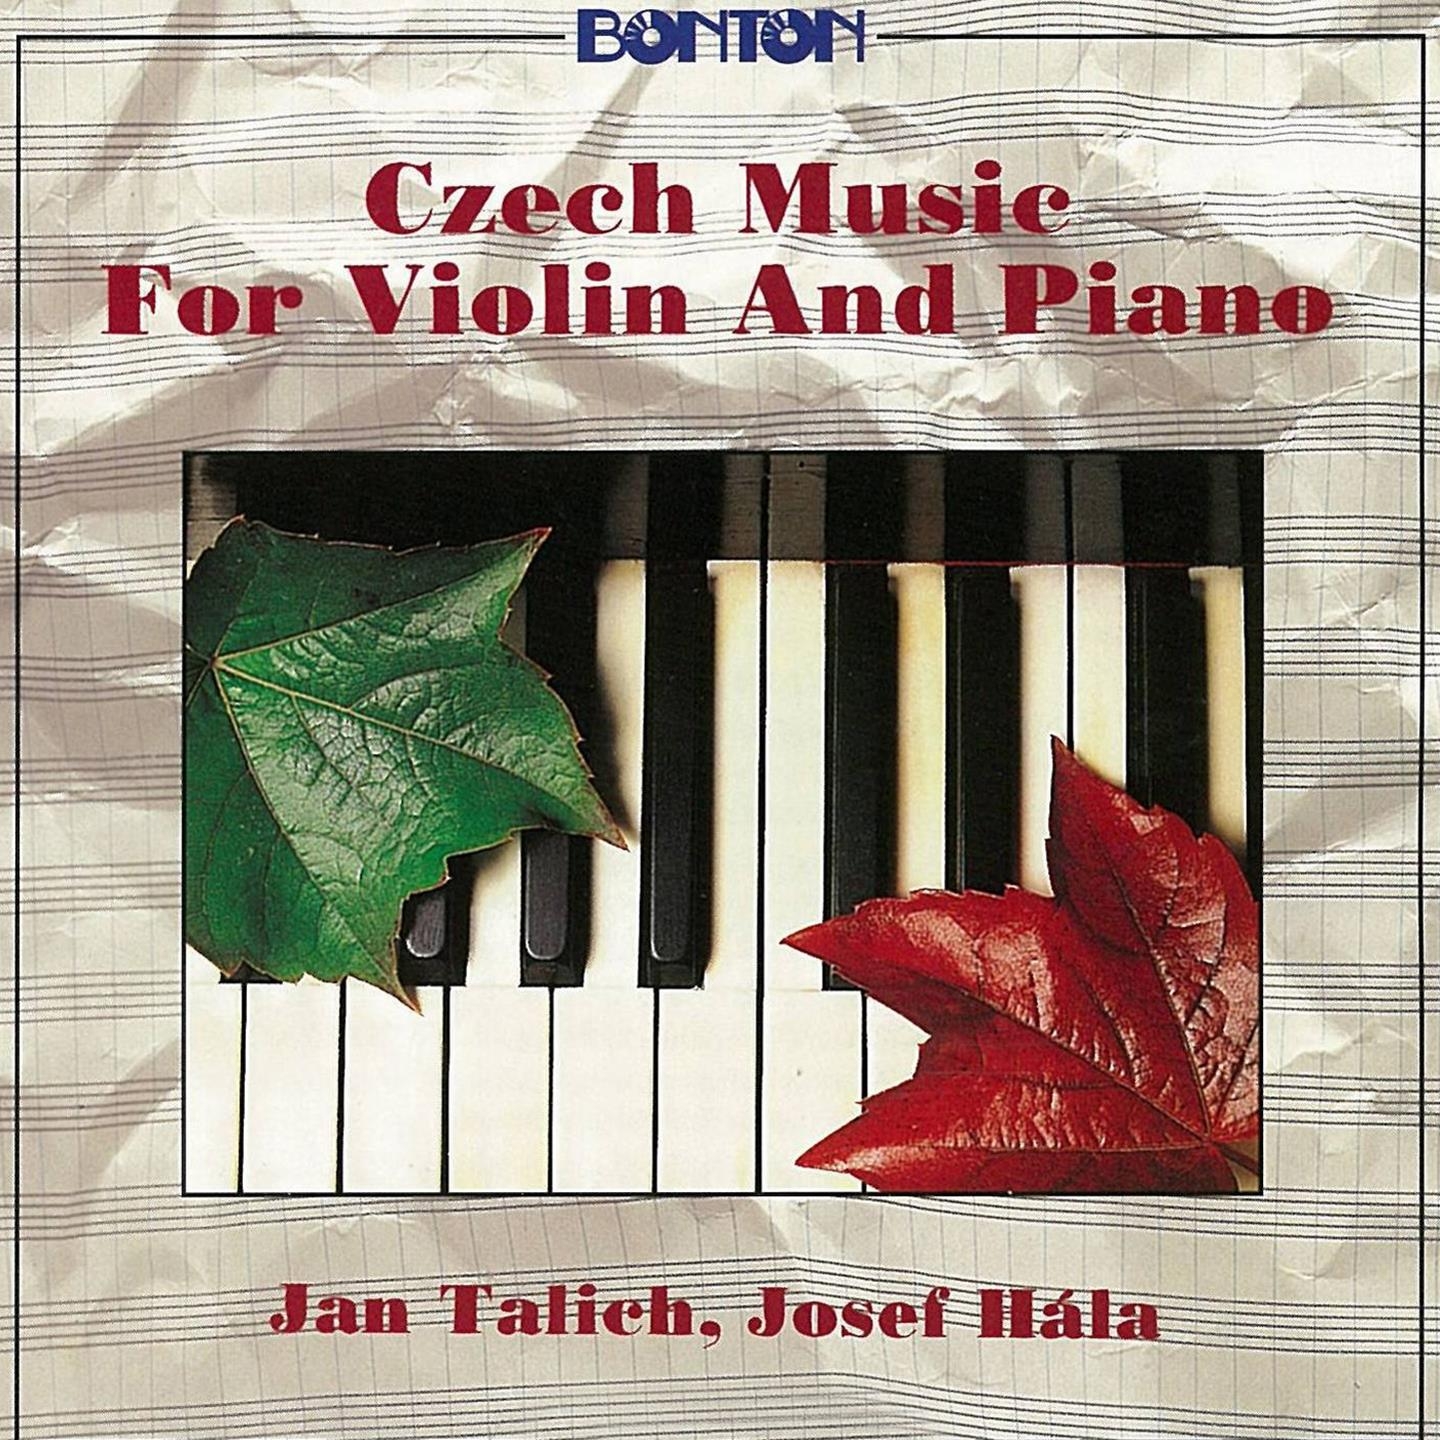 Four Pieces for Violin and Piano, Op. 17, .: Burlesque